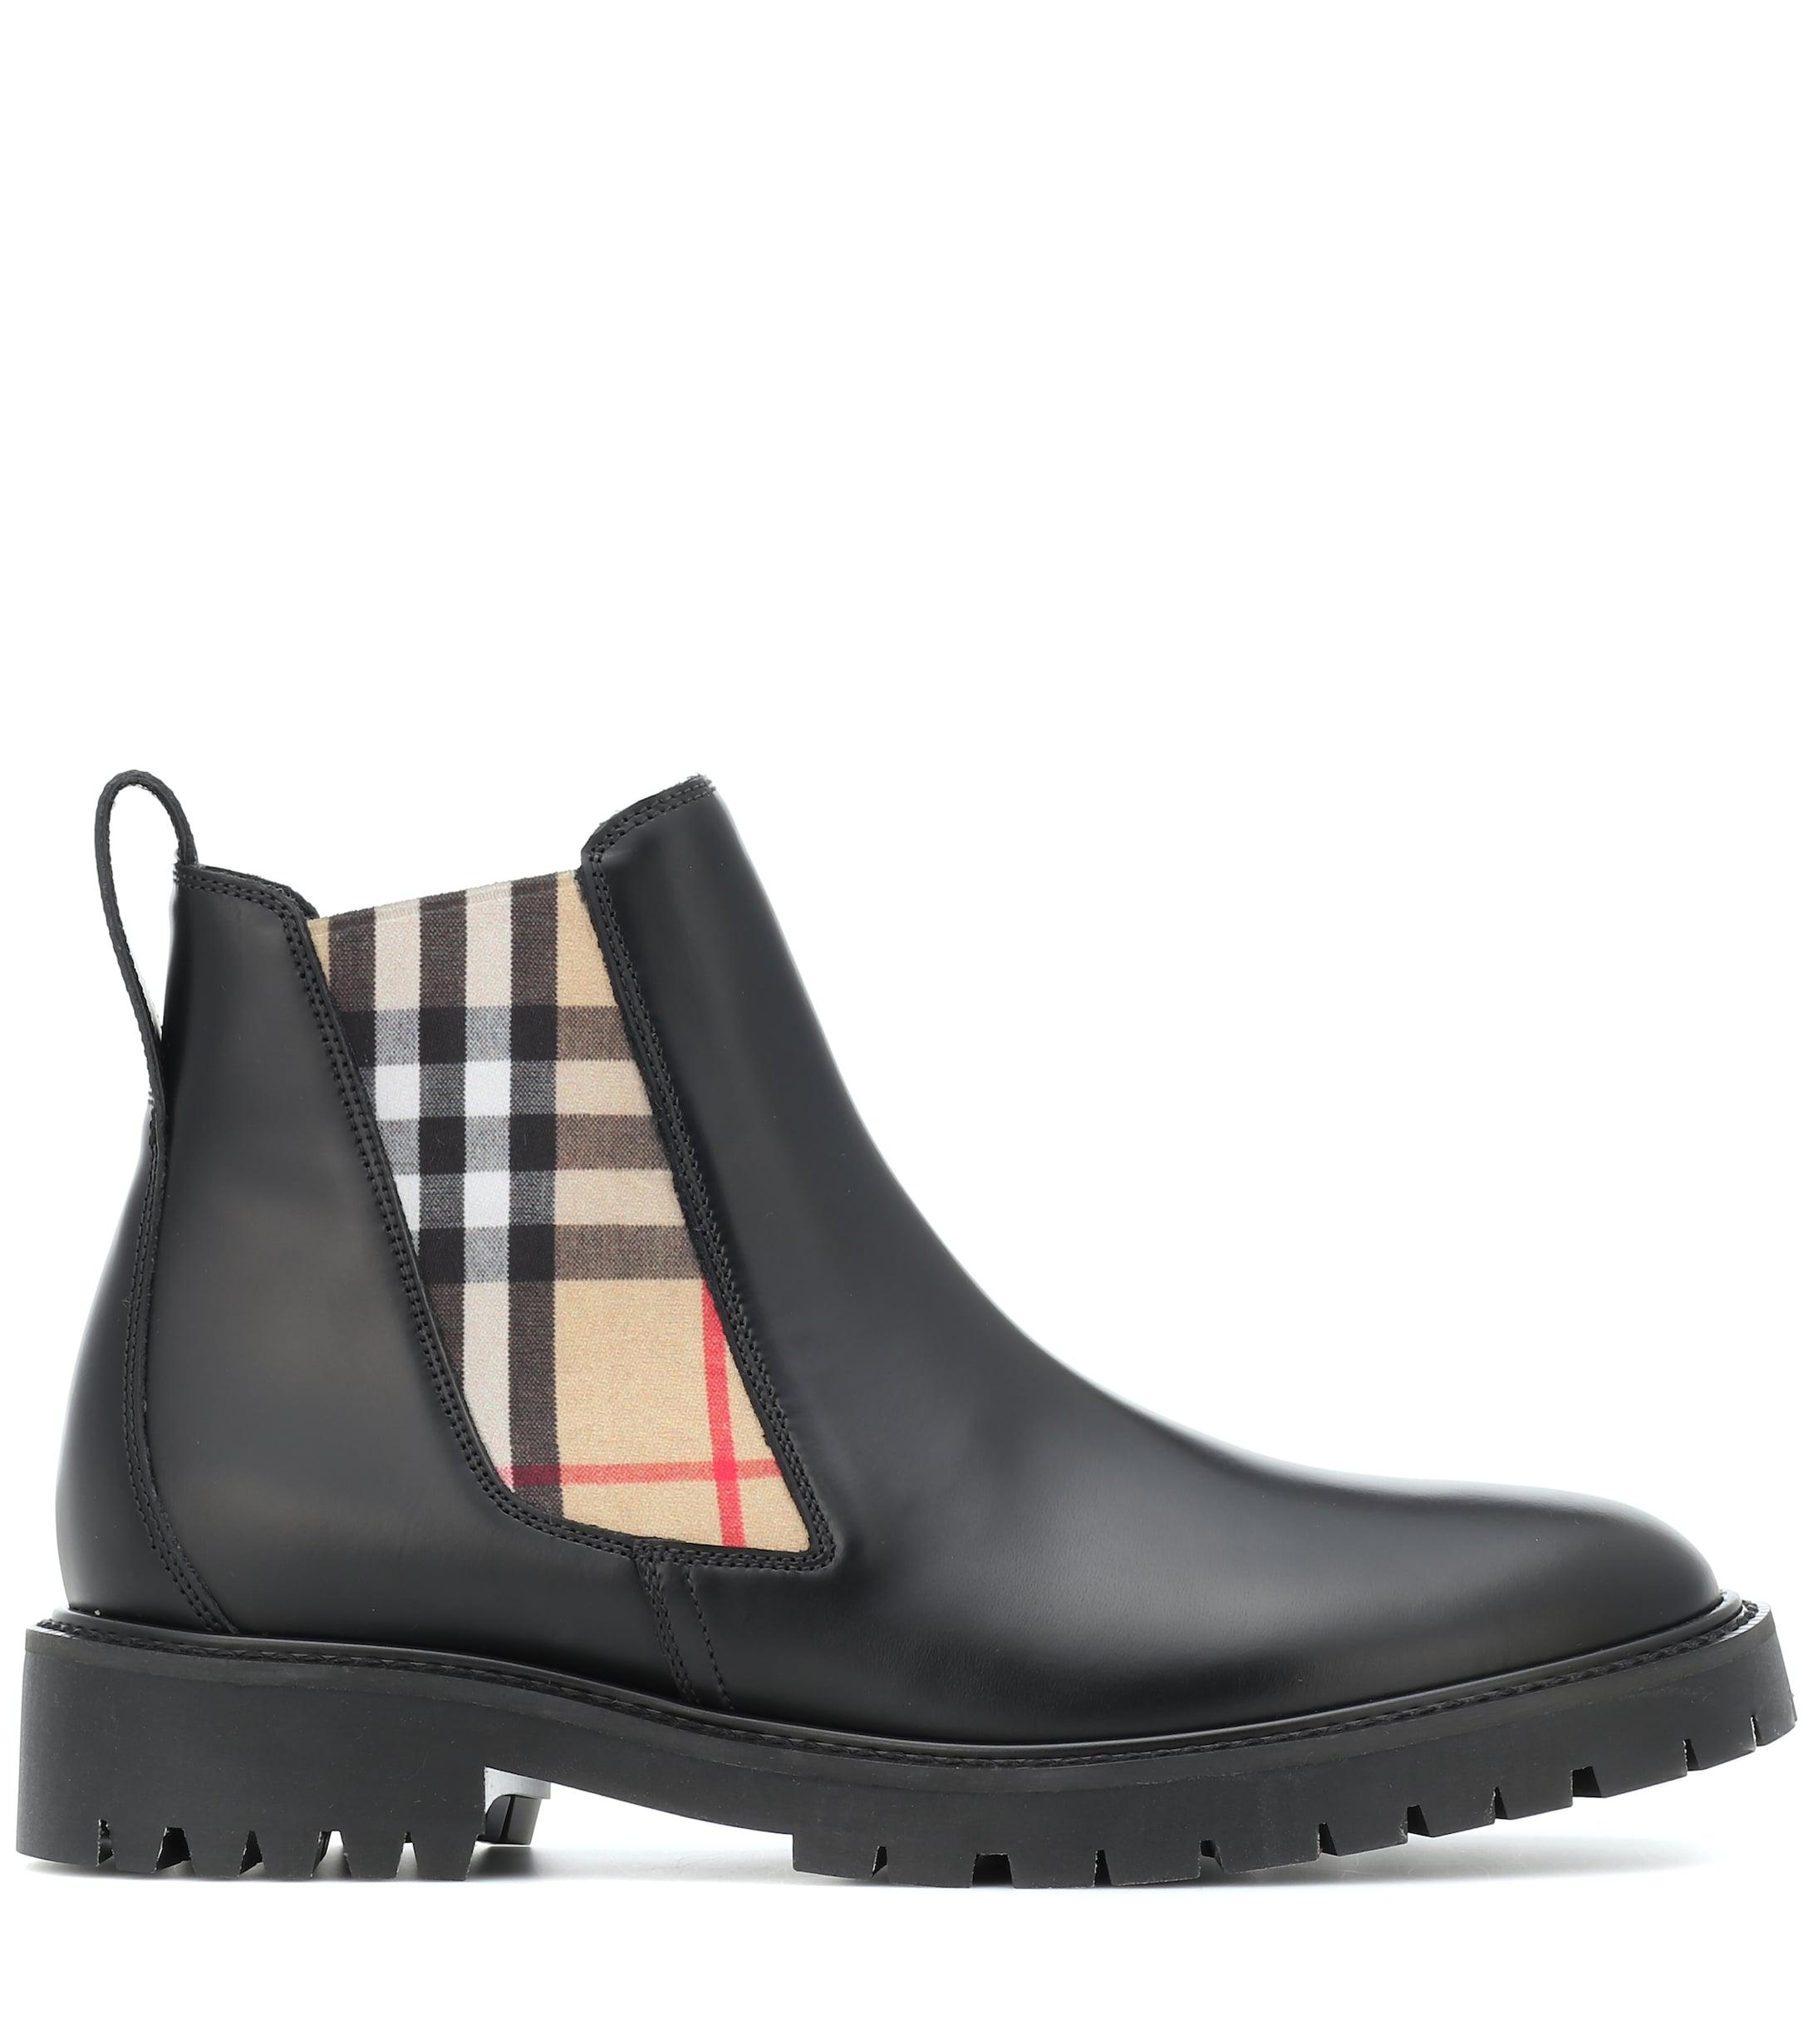 Burberry Vintage Check Detail Leather Chelsea Boots in Black - Lyst